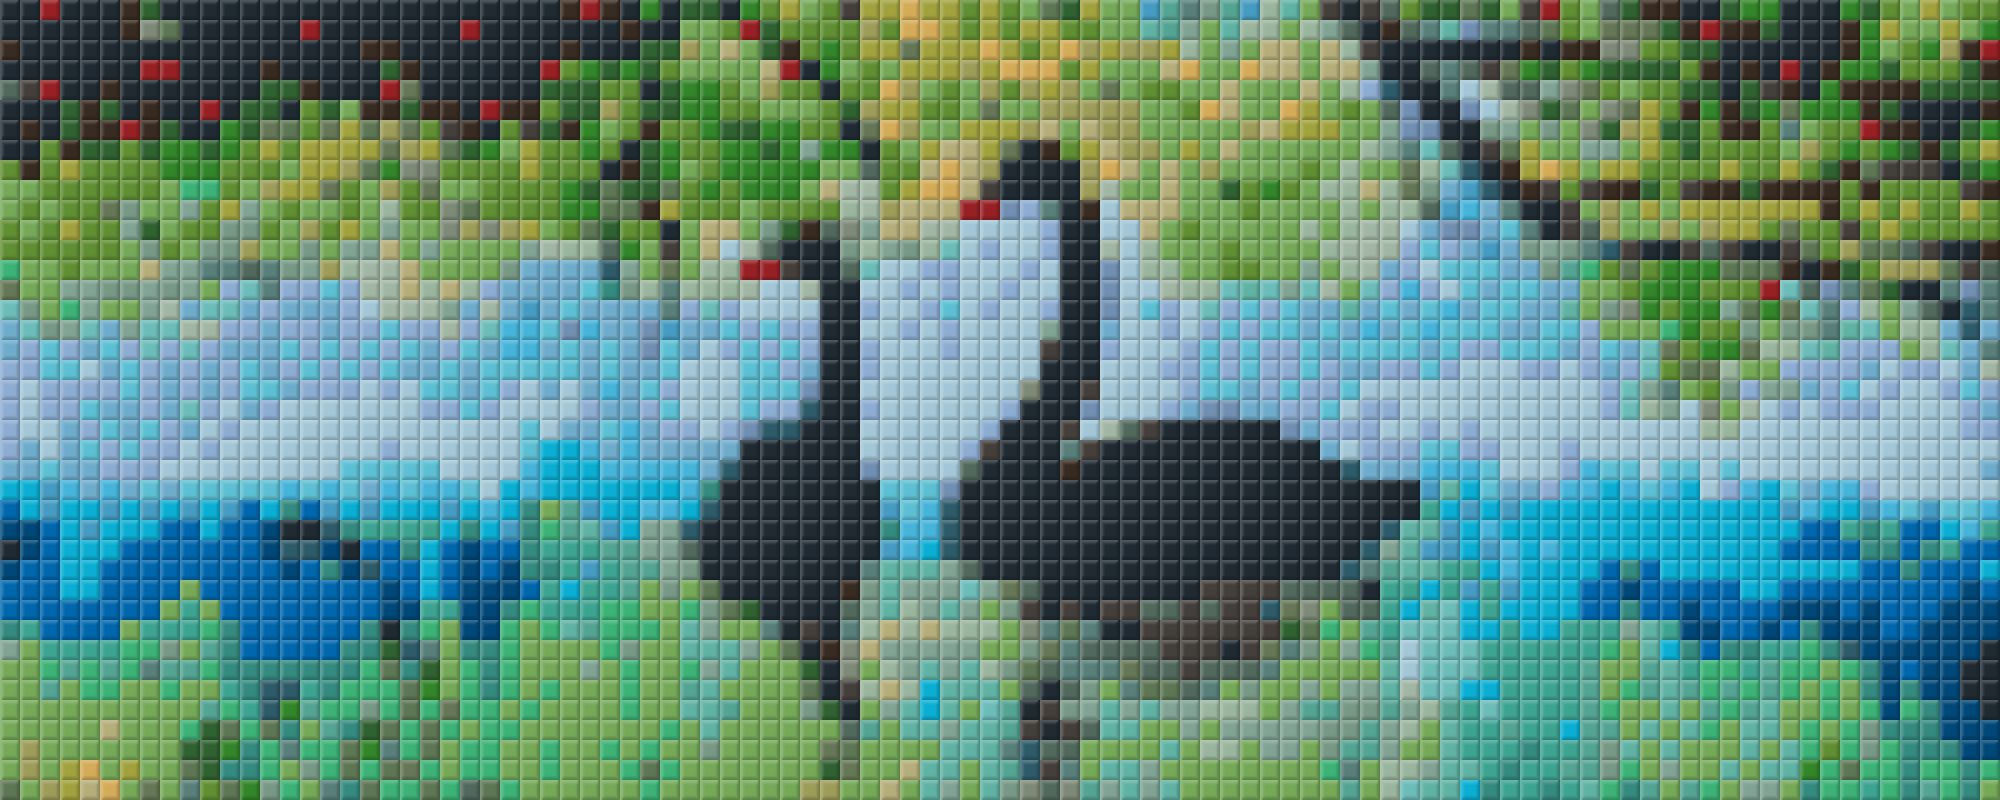 Pixel hobby classic template - black swans